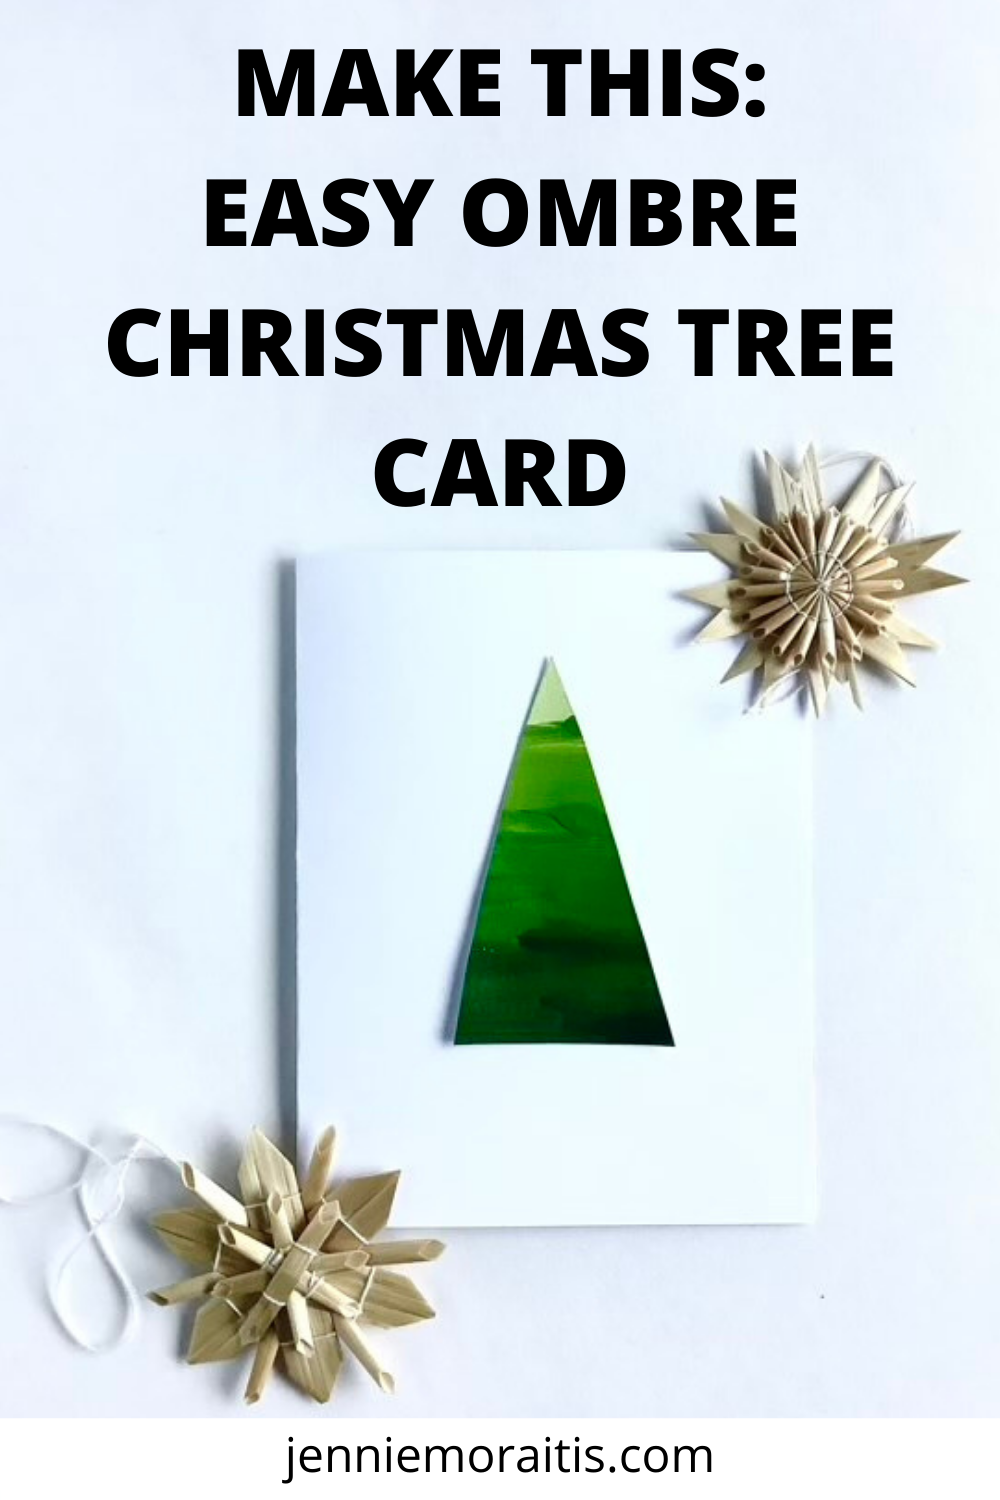 This ombré Christmas tree card is so simple to make you won’t believe it! Perfect as a kid’s craft and the leftovers make great pieces for collage!